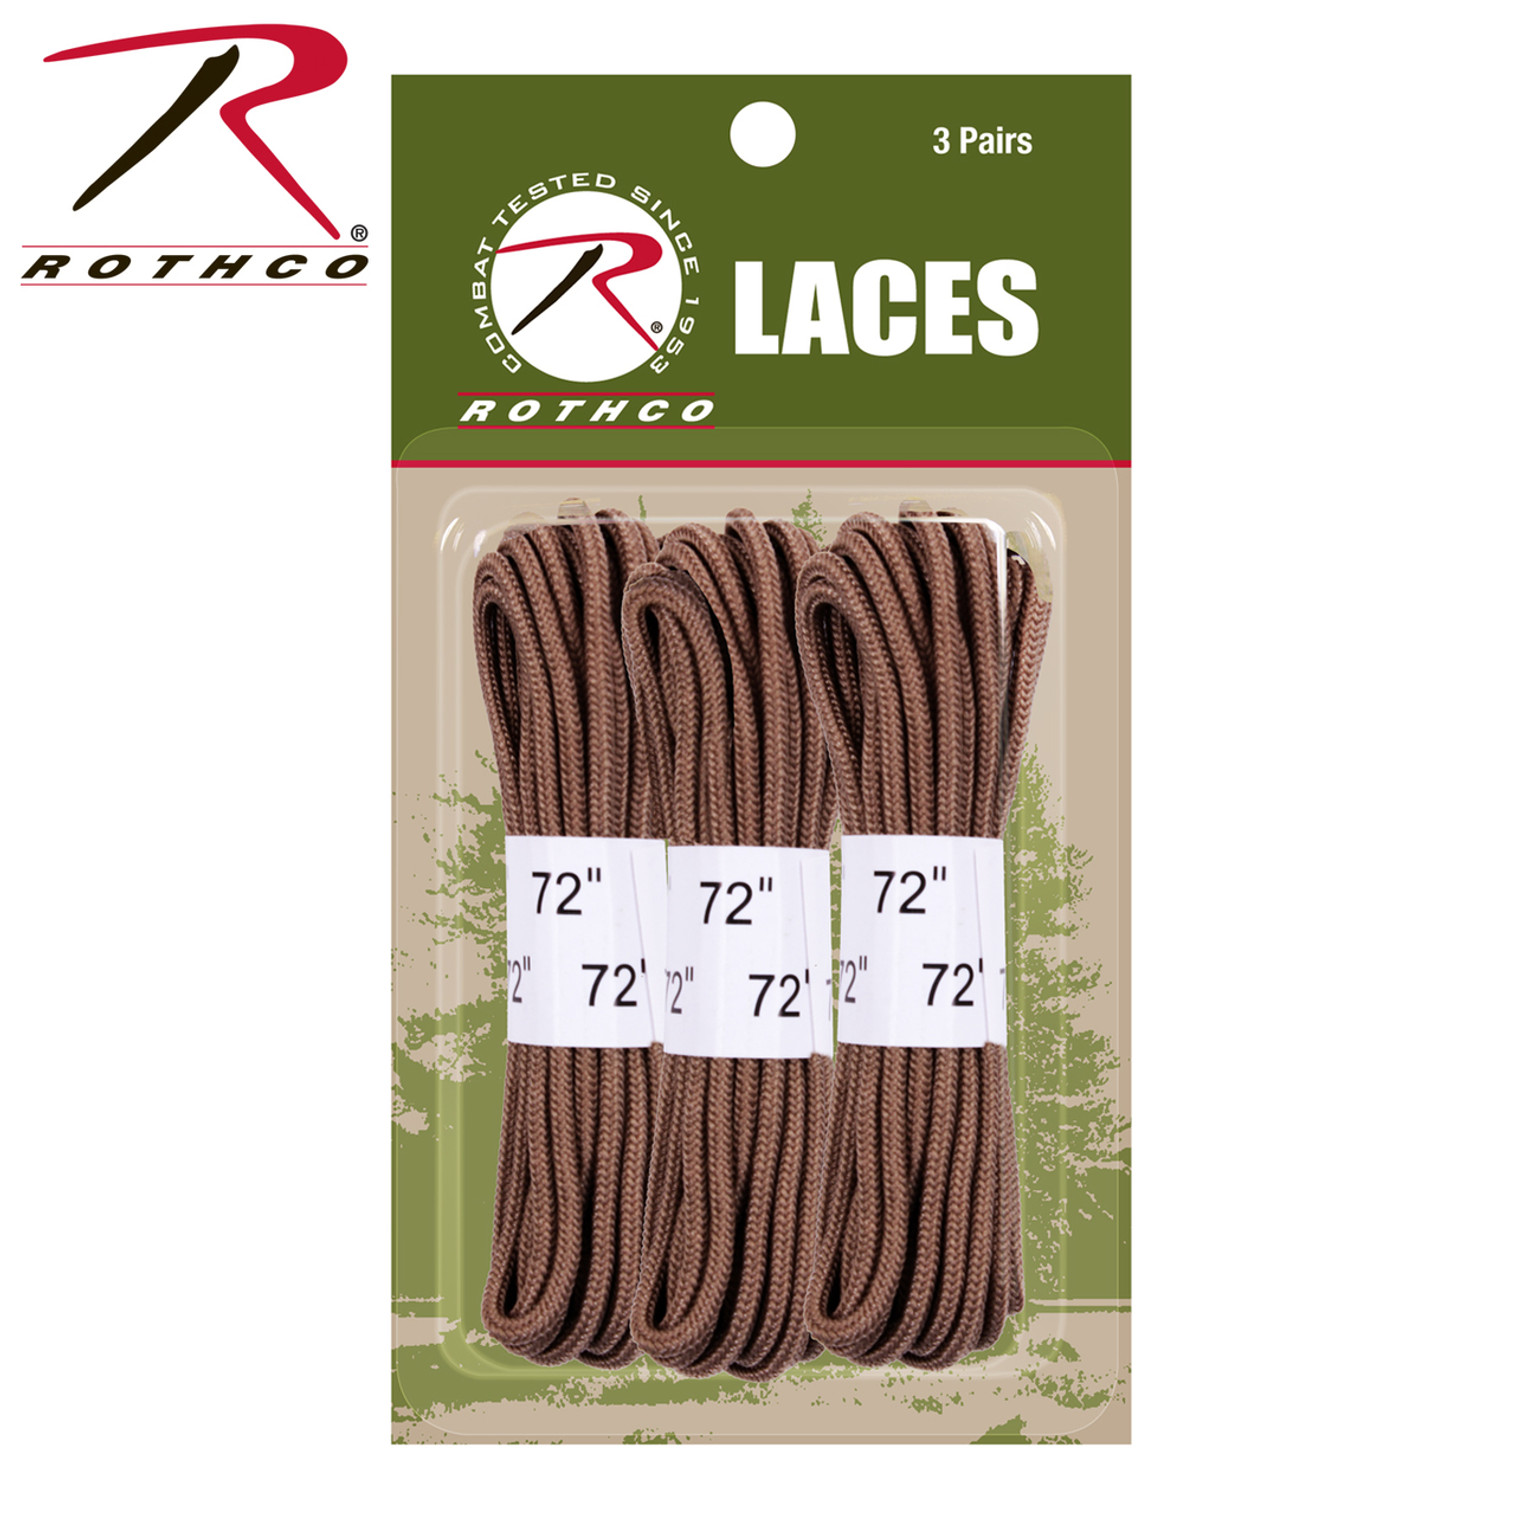 Rothco 72" Boot Laces - 3 Pack - Coyote Brown